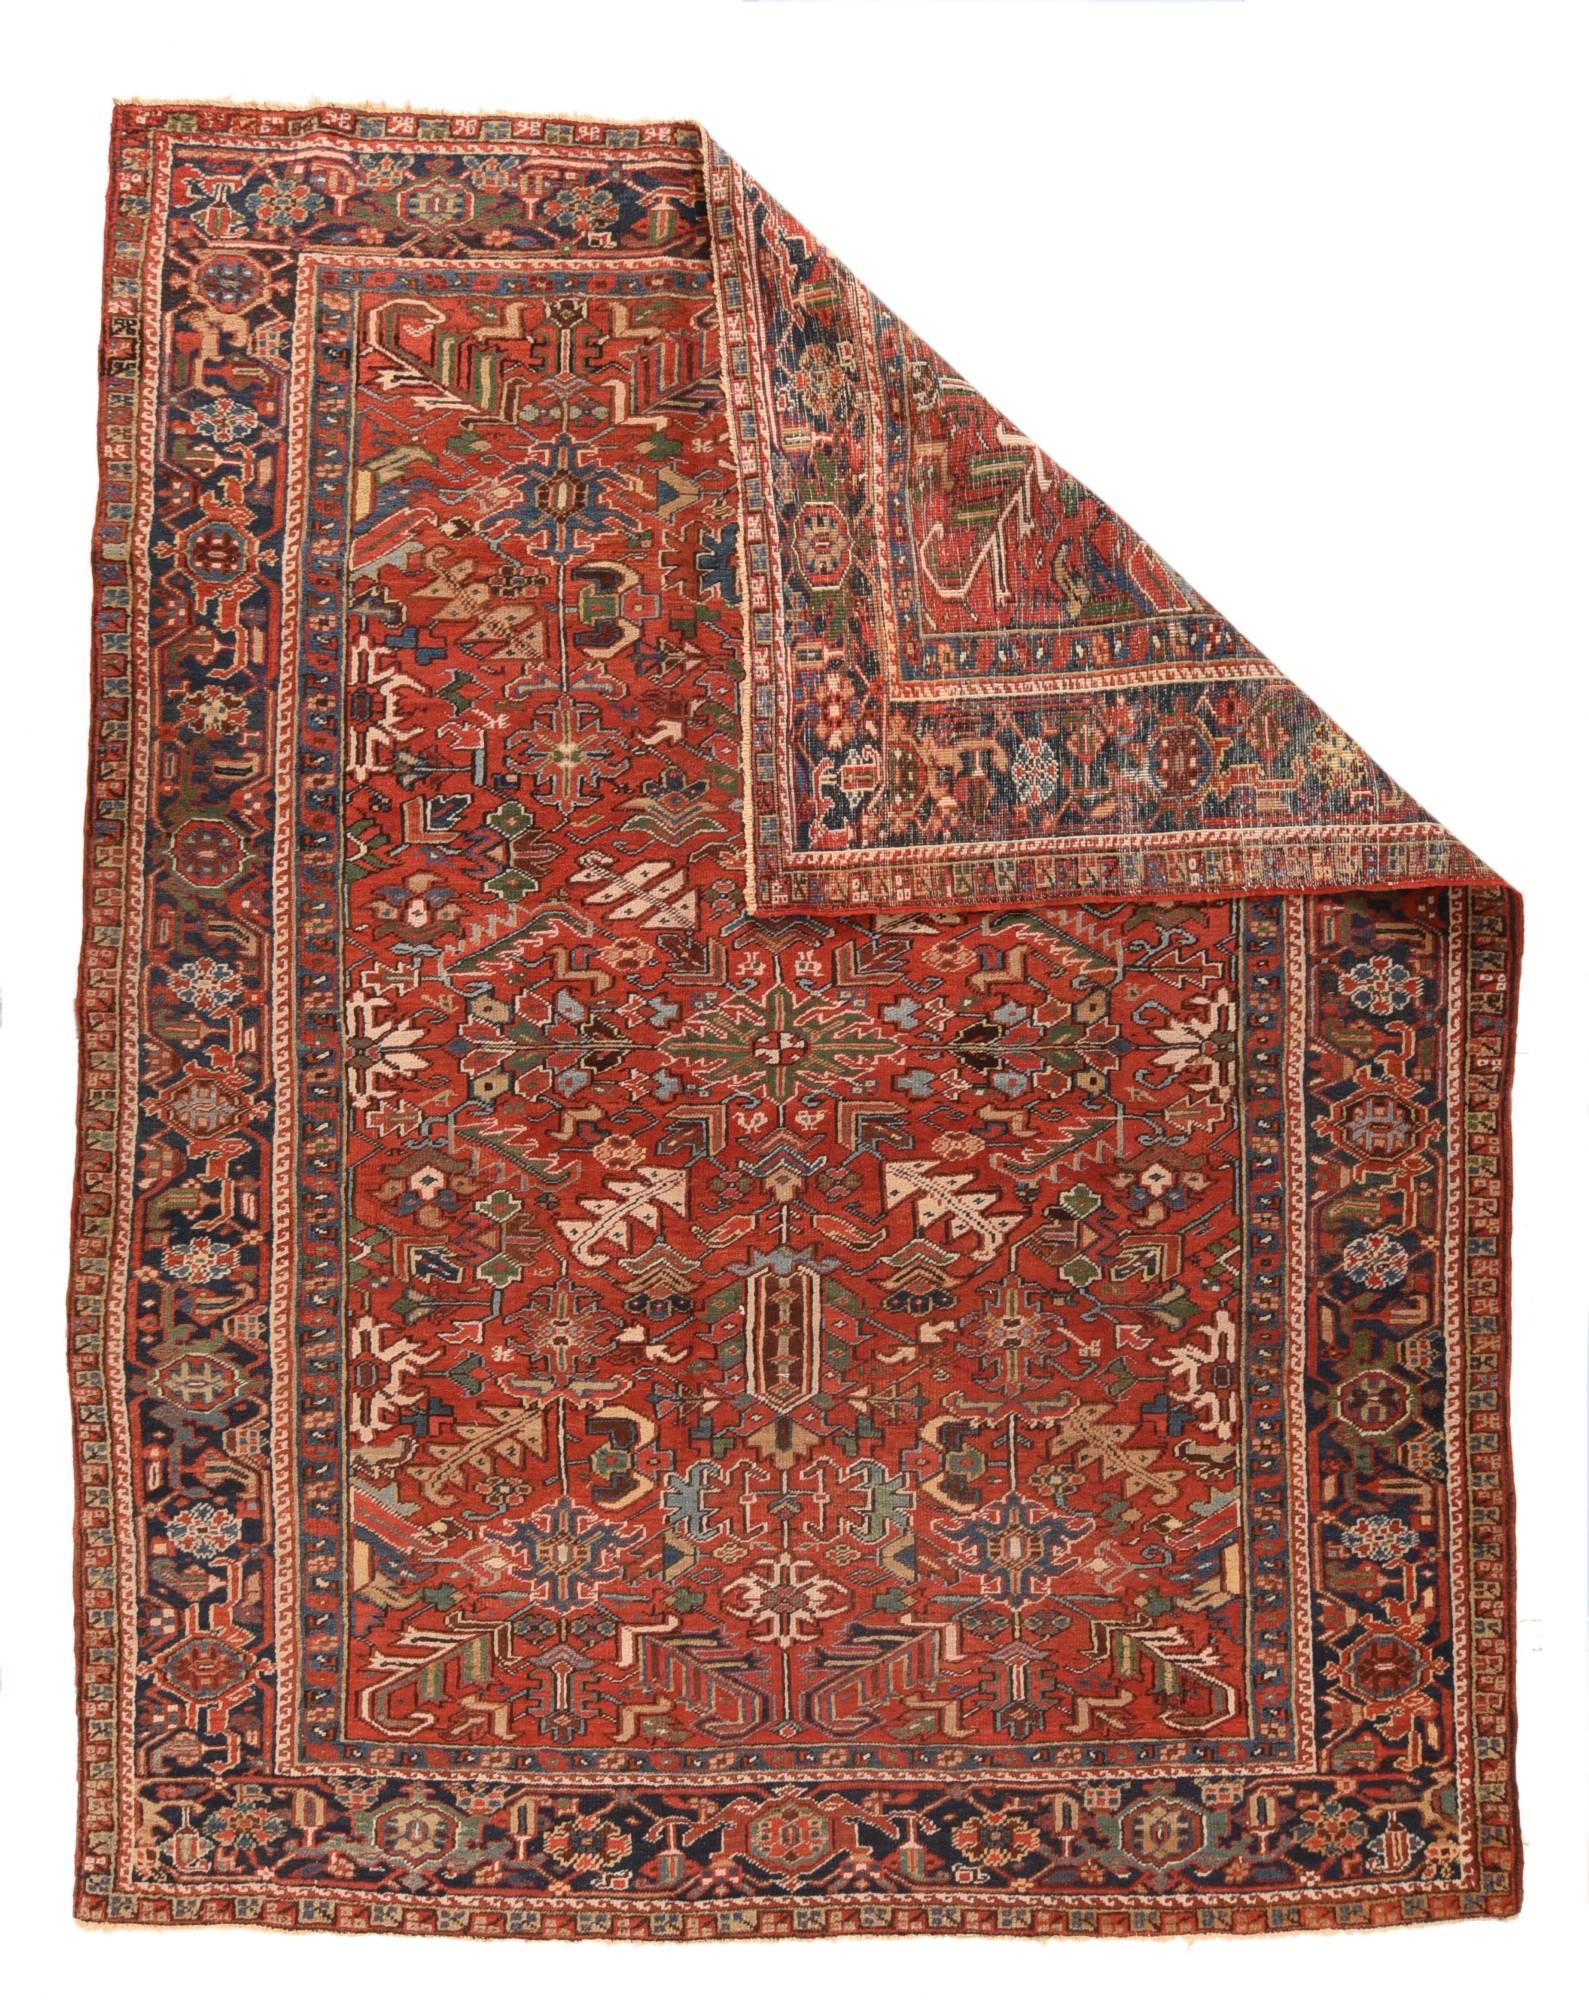 Vintage Heriz rug 7'4''x¬† 9'3''. This all-natural dye rustic NW Persian piece shows a red field with a characteristic pattern of sharply jagged leaves, hooked stiff leaves, and two ragged palmettes with tall hexagon centres, set around a central